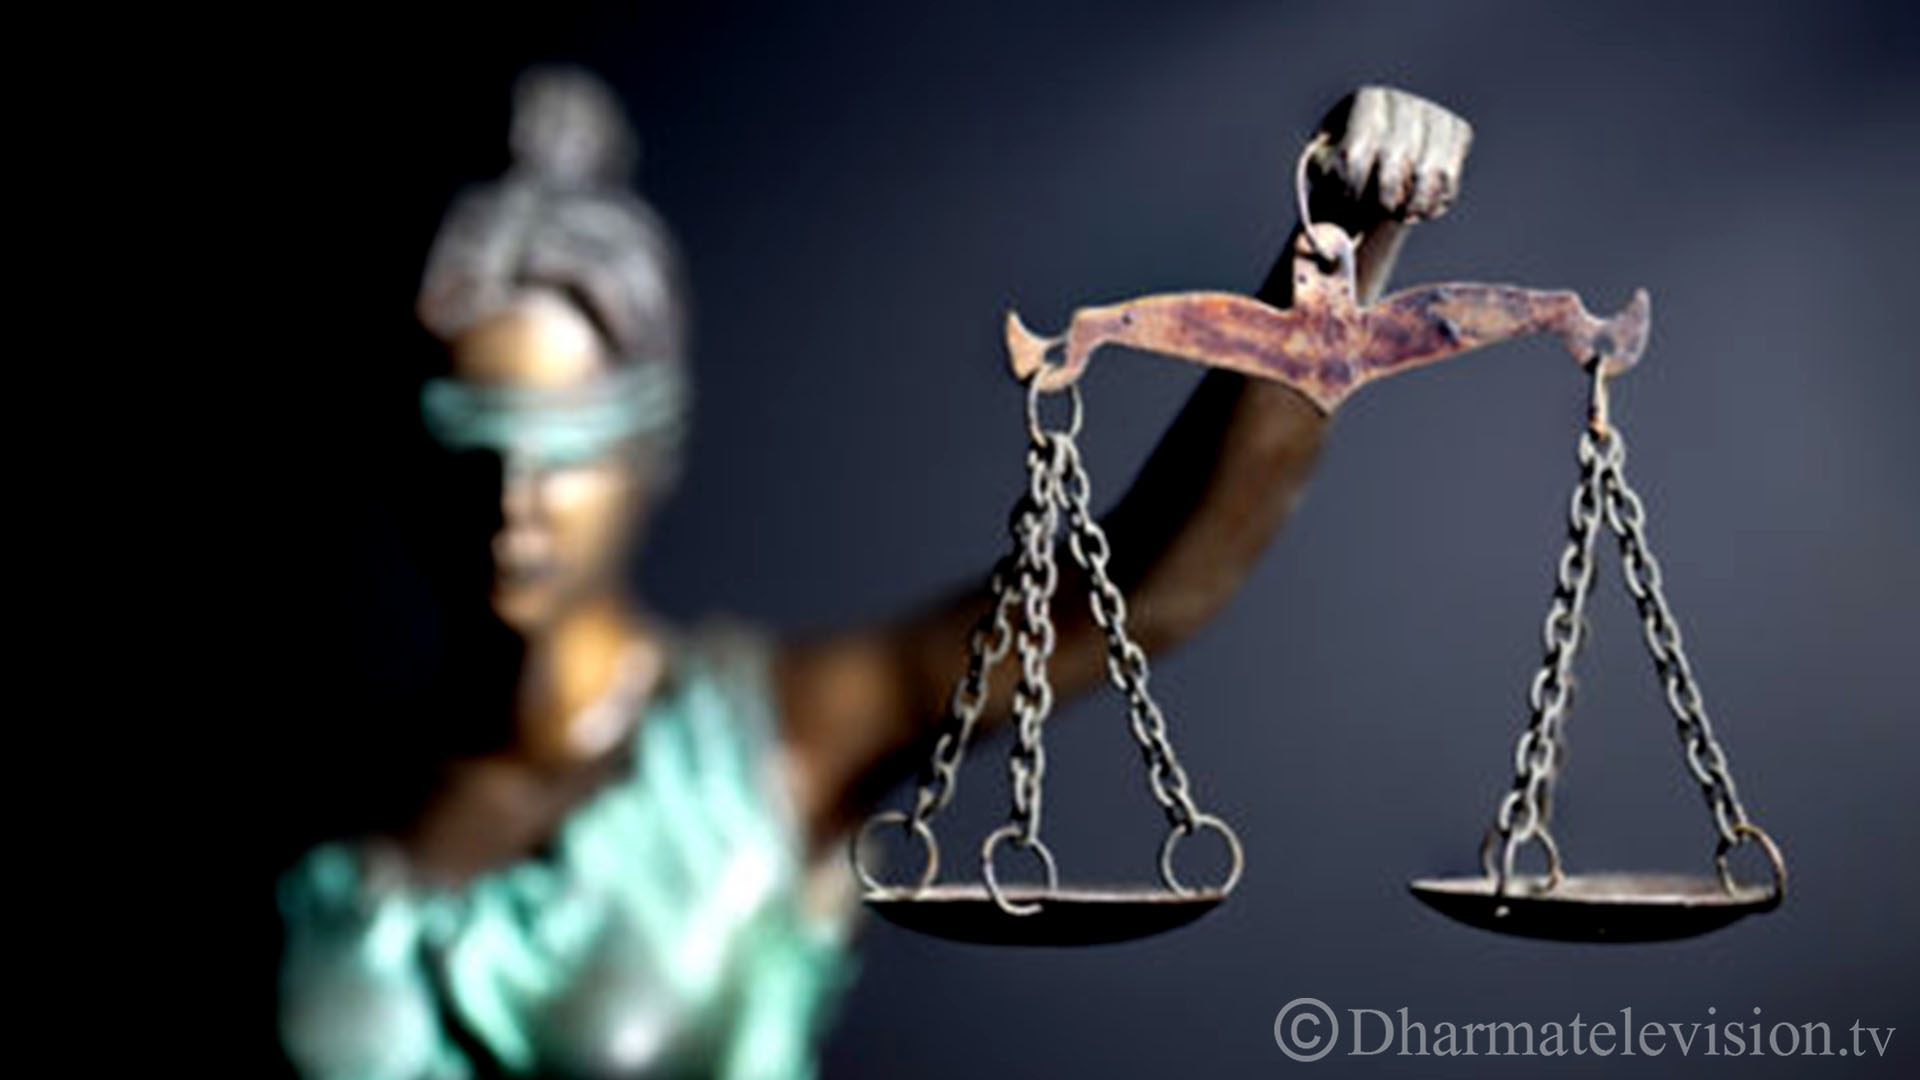 No law can be made to give death penalty to rapist in Nepal